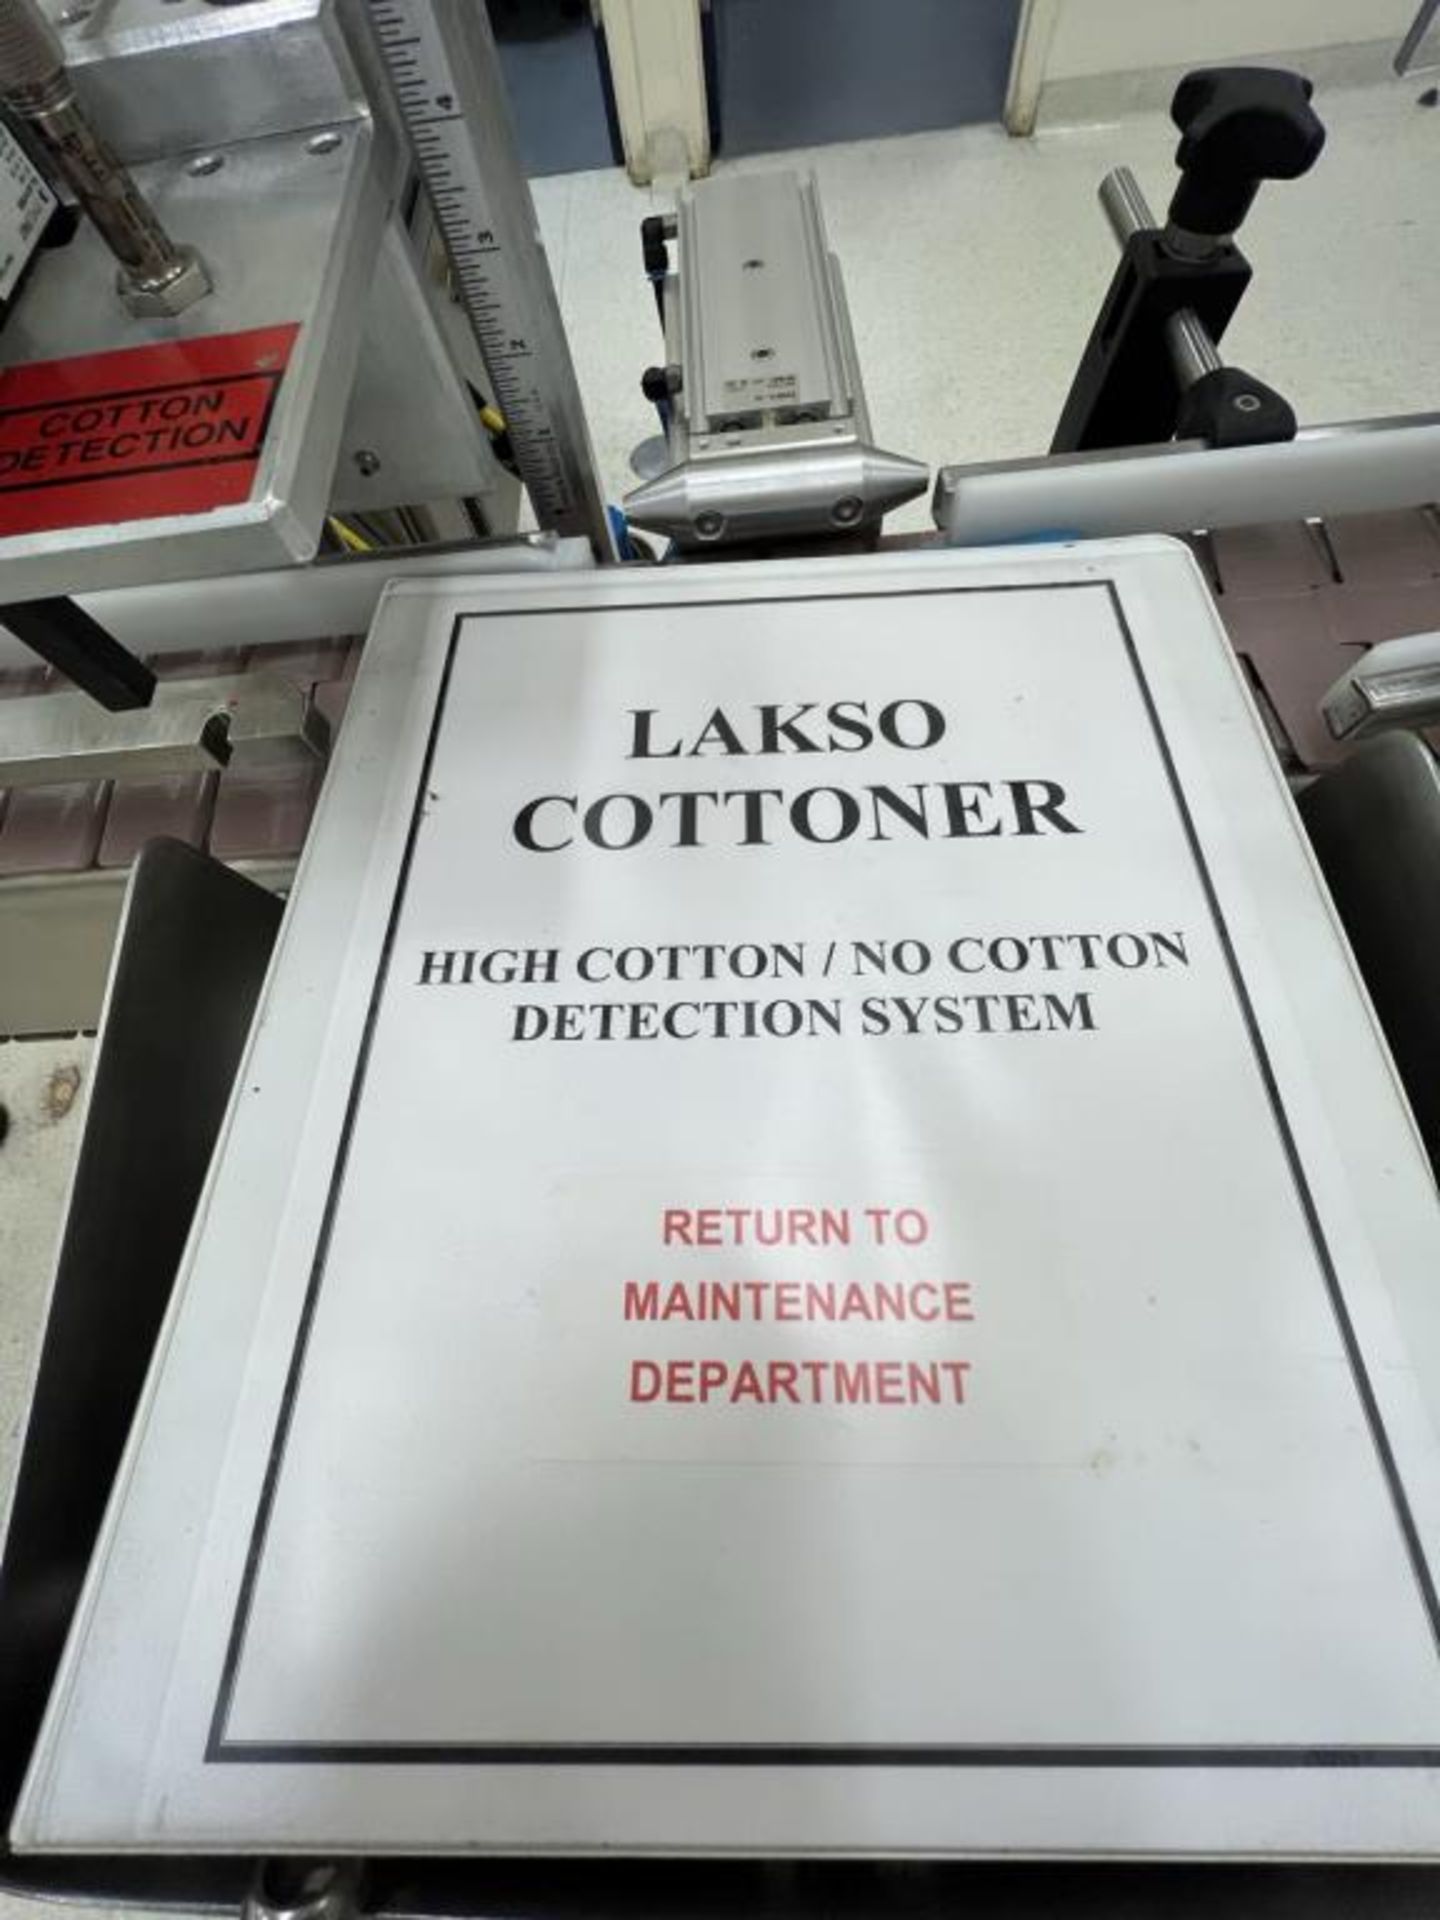 Lakso No Cotton/High Cotton Detection System - Image 2 of 3